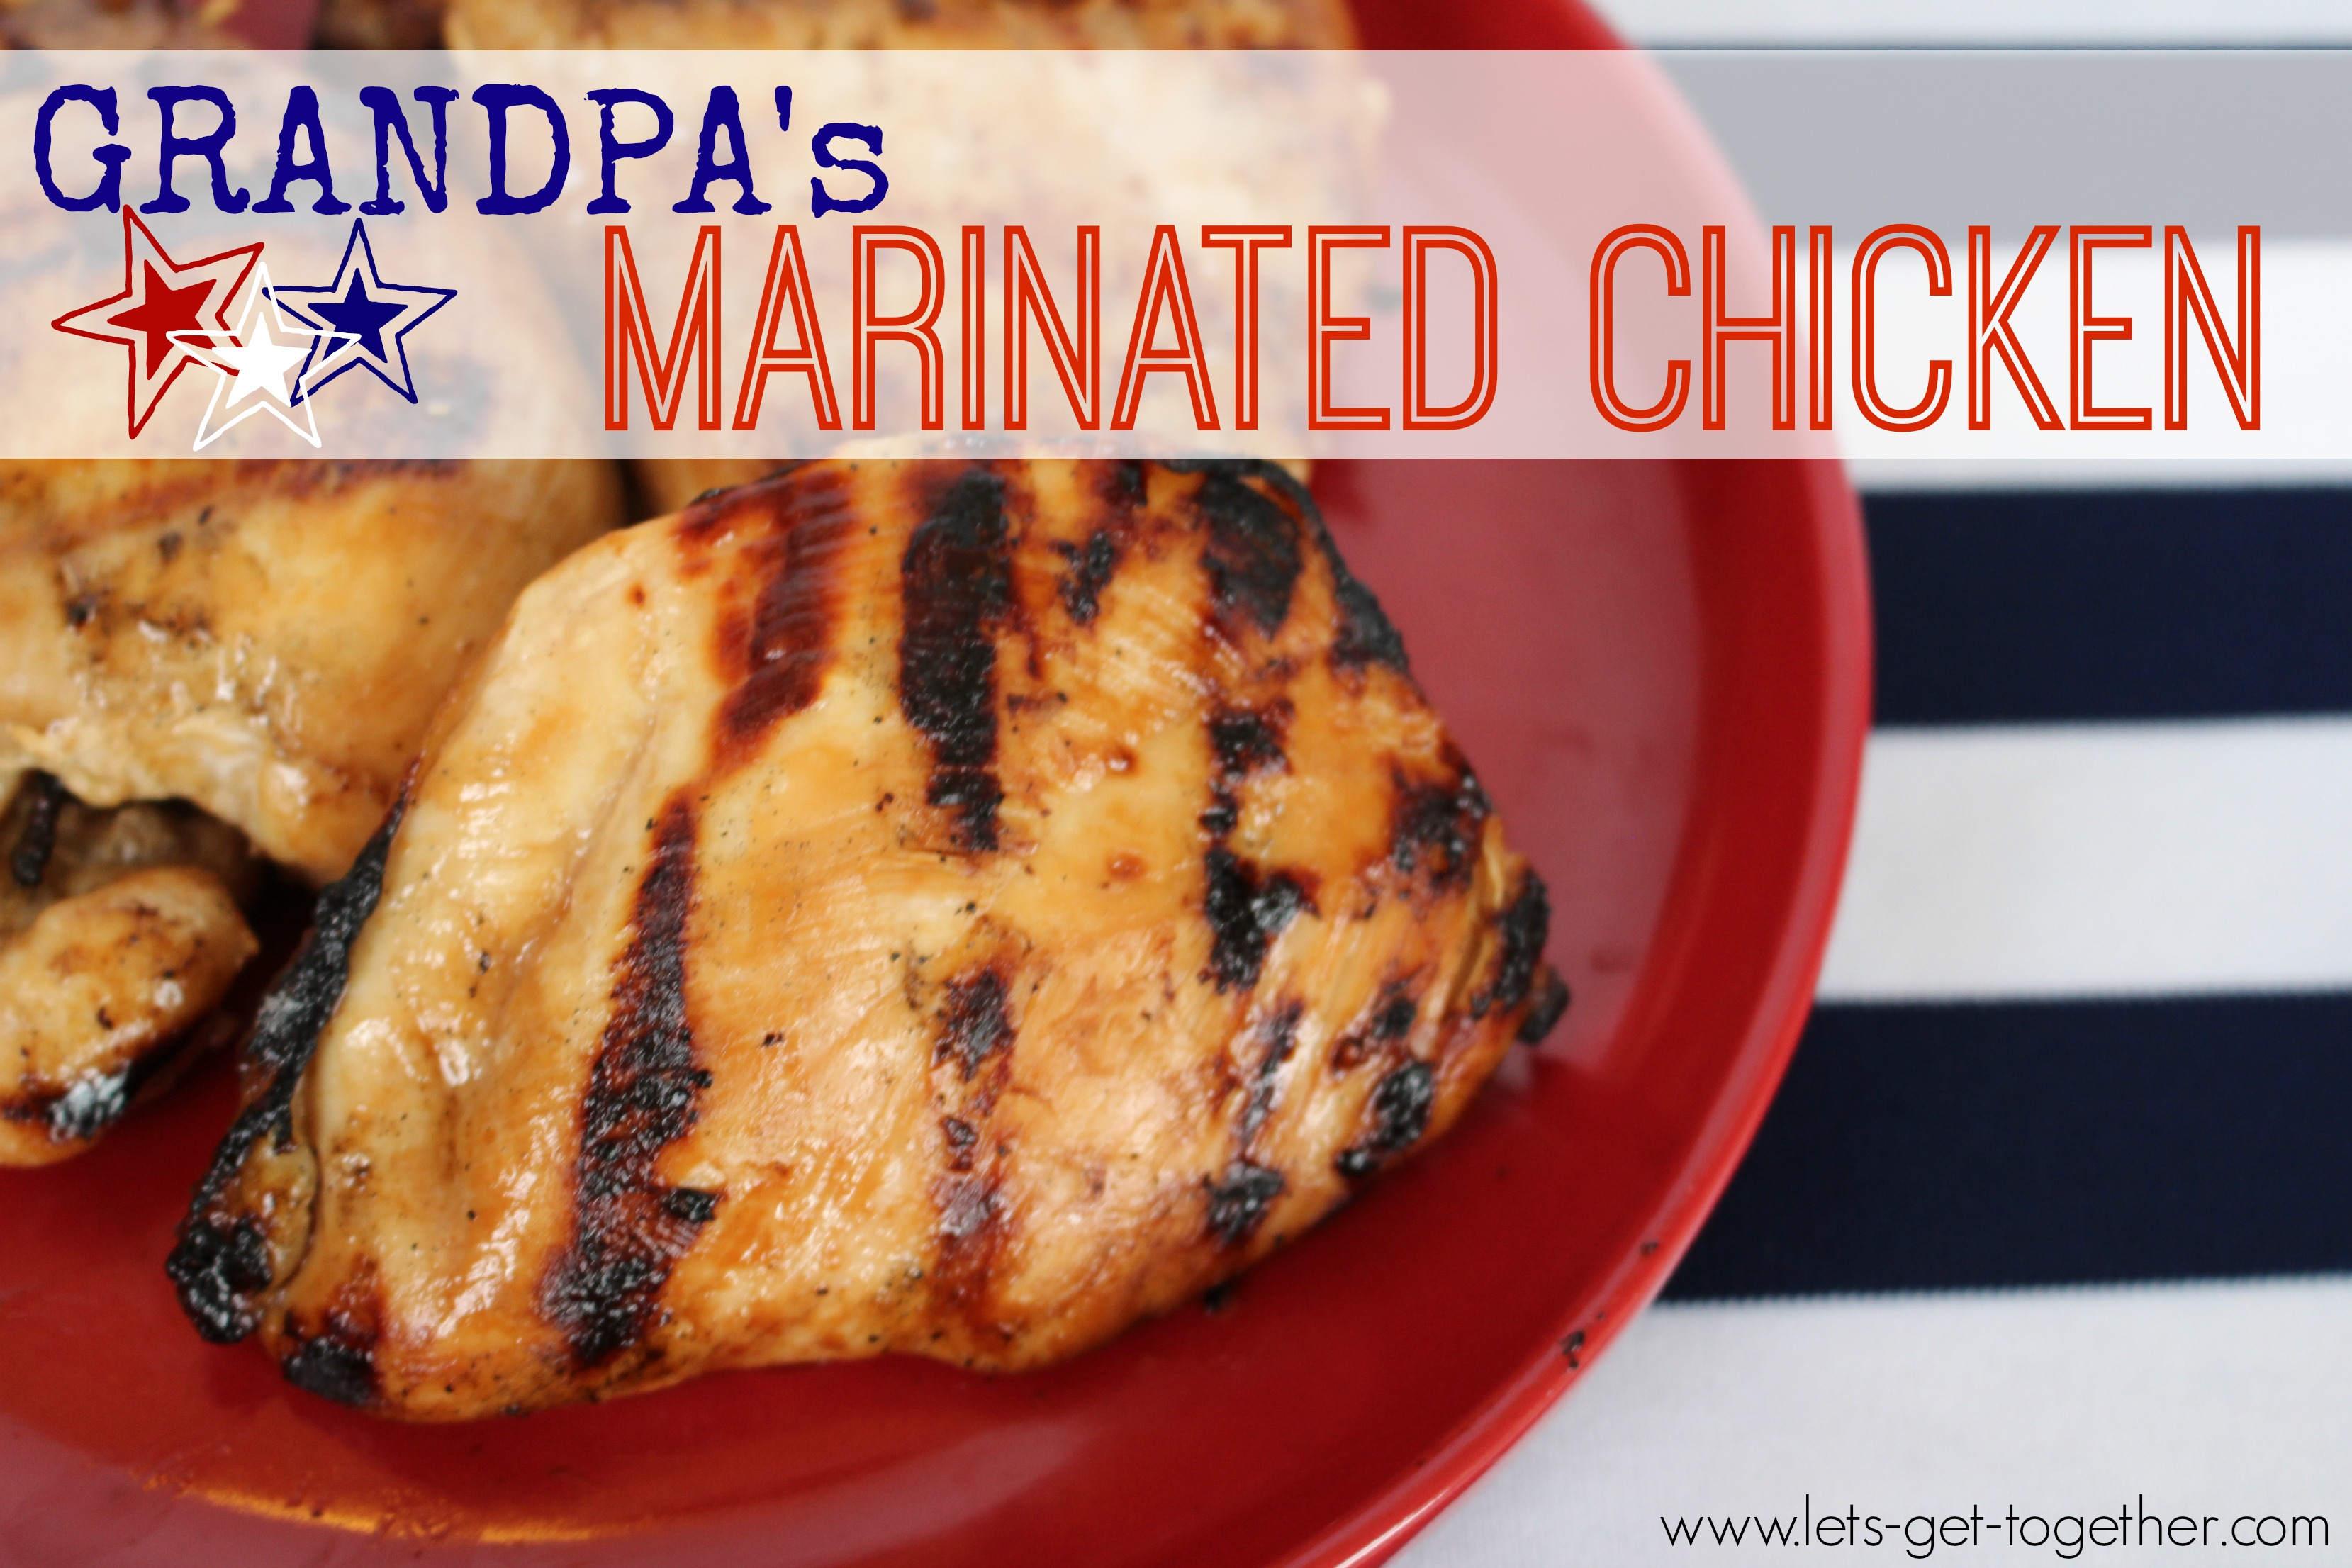 Grandpa's Marinated Chicken from Let's Get Together